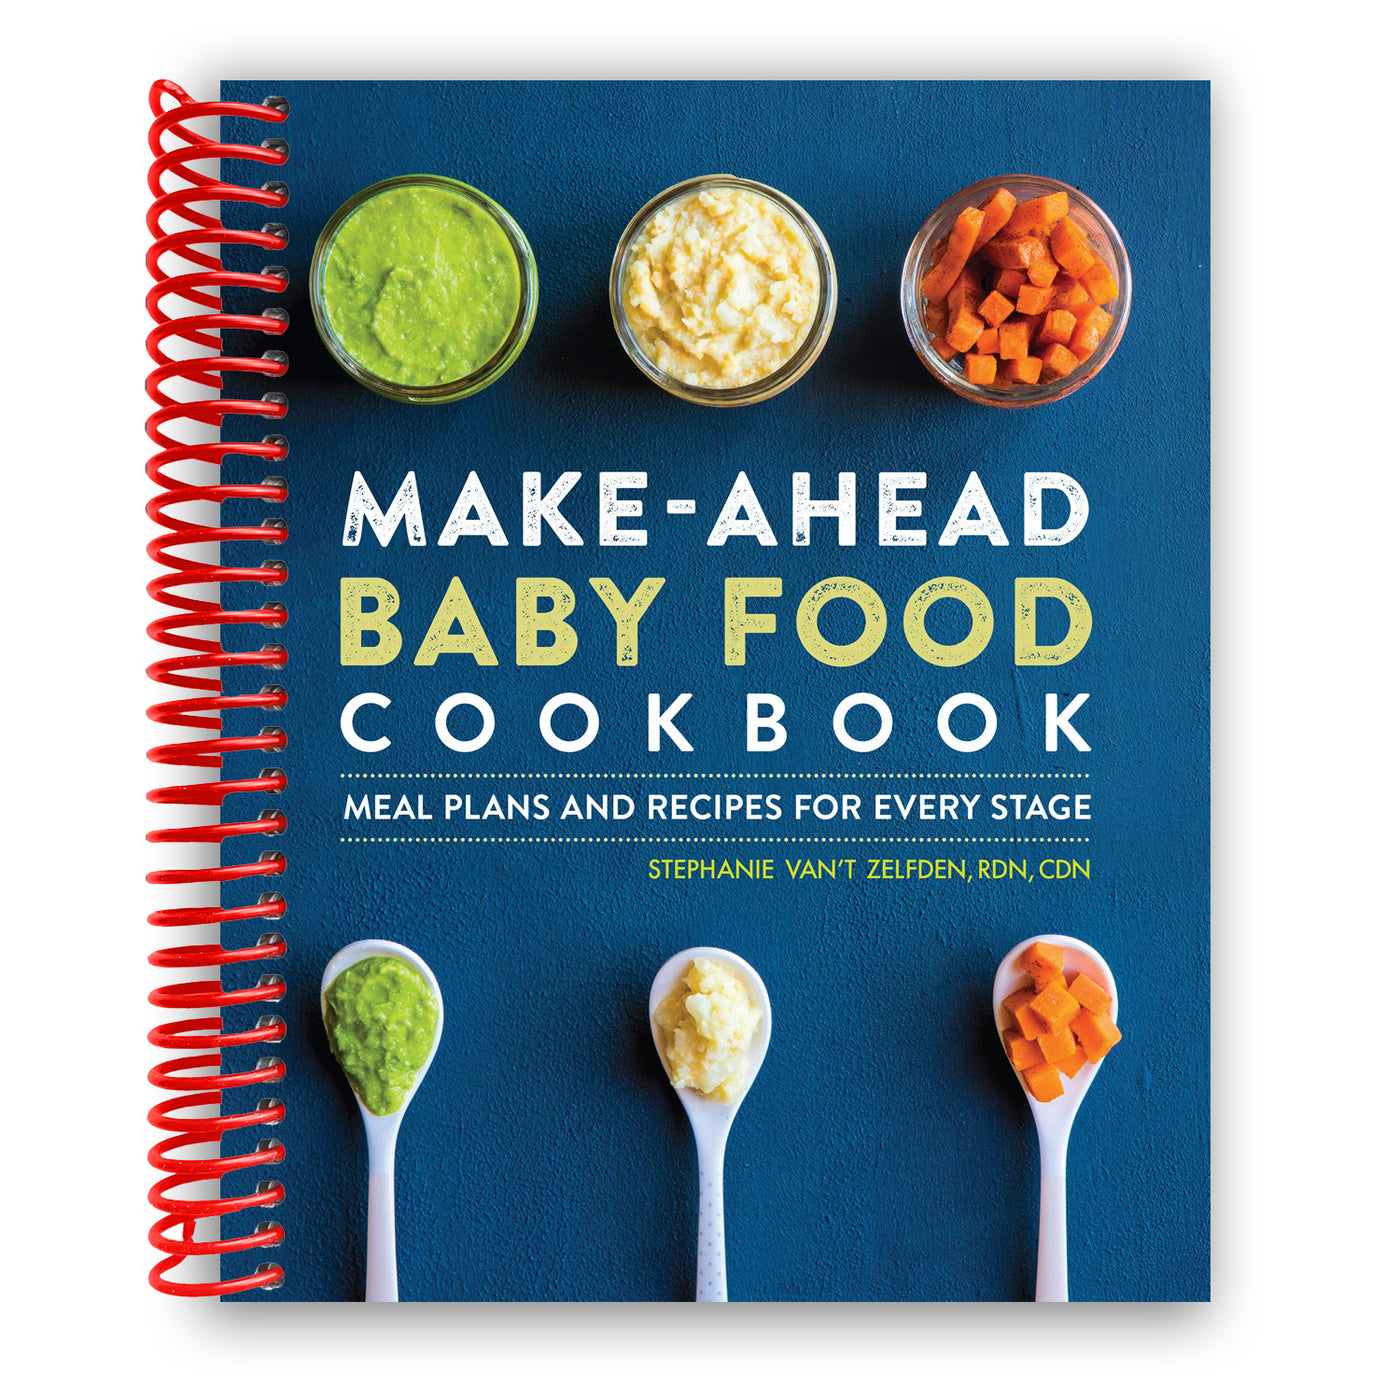 Make-Ahead Baby Food Cookbook: Meal Plans and Recipes for Every Stage (Spiral Bound)